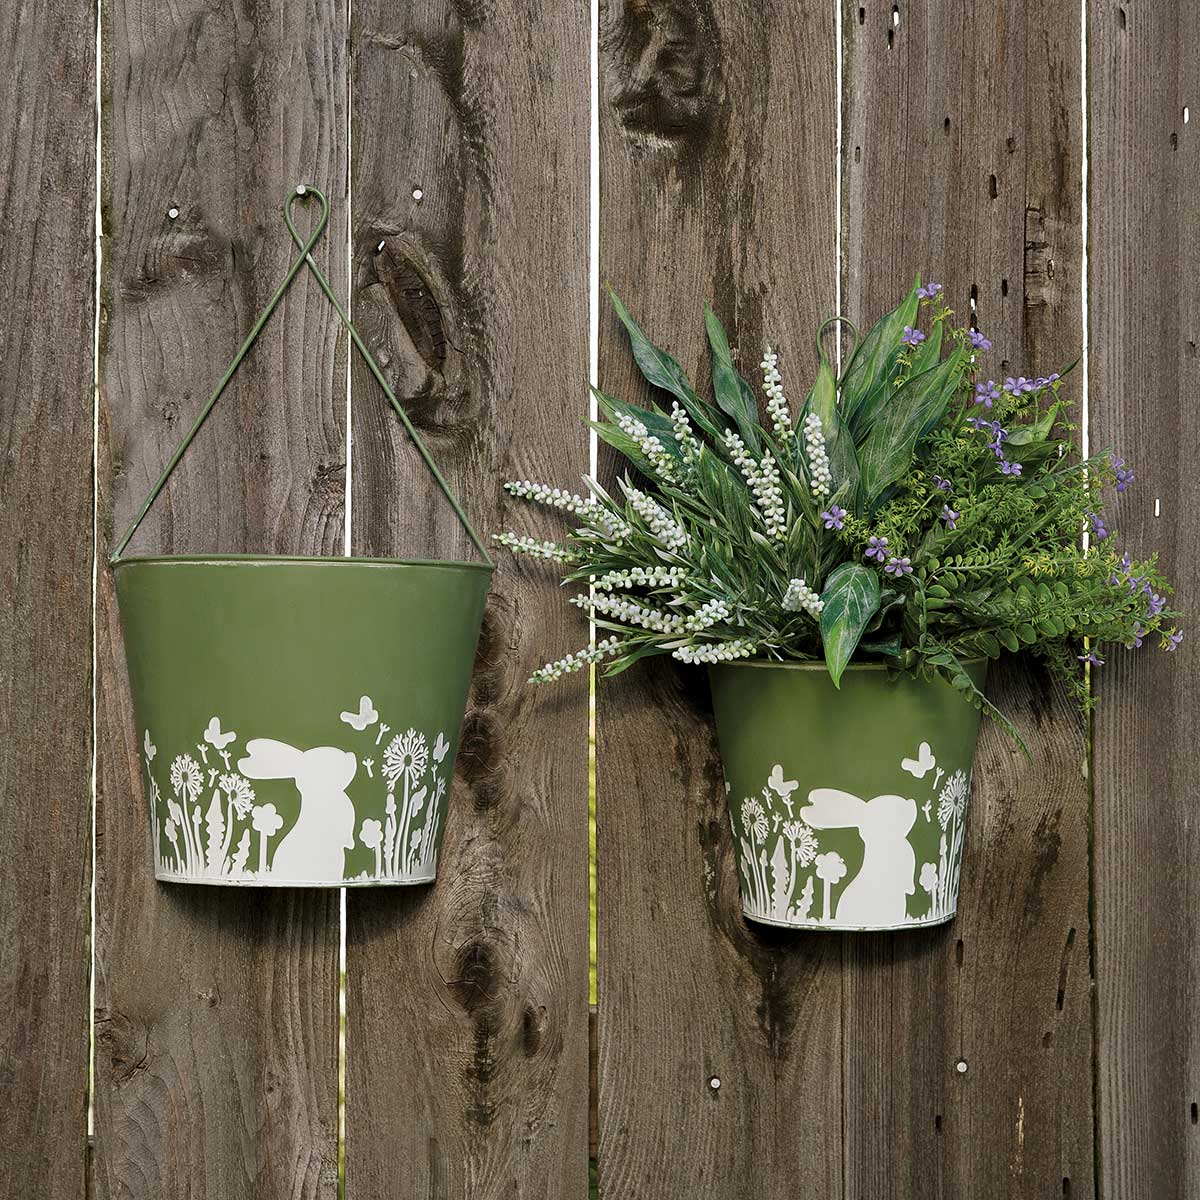 WALL PLANTER RABBIT MOTIF SMALL 6.75IN X 4.75IN X 14.25IN